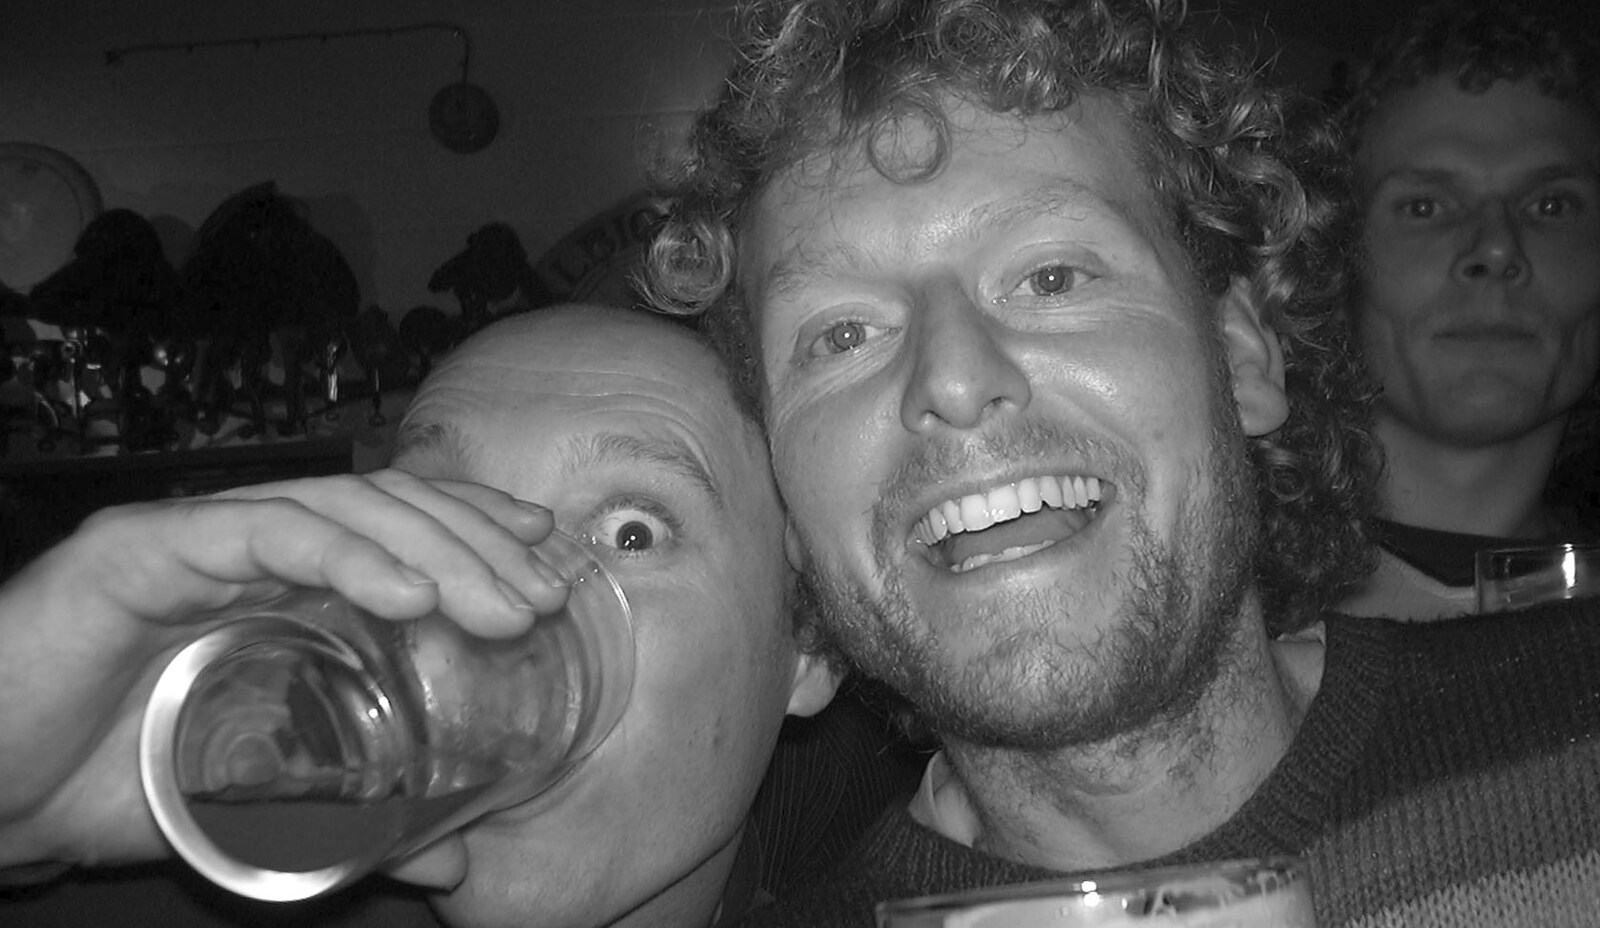 Gov and Wavy from The BBs at The Cider Shed, Banham, Norfolk - 19th January 2003